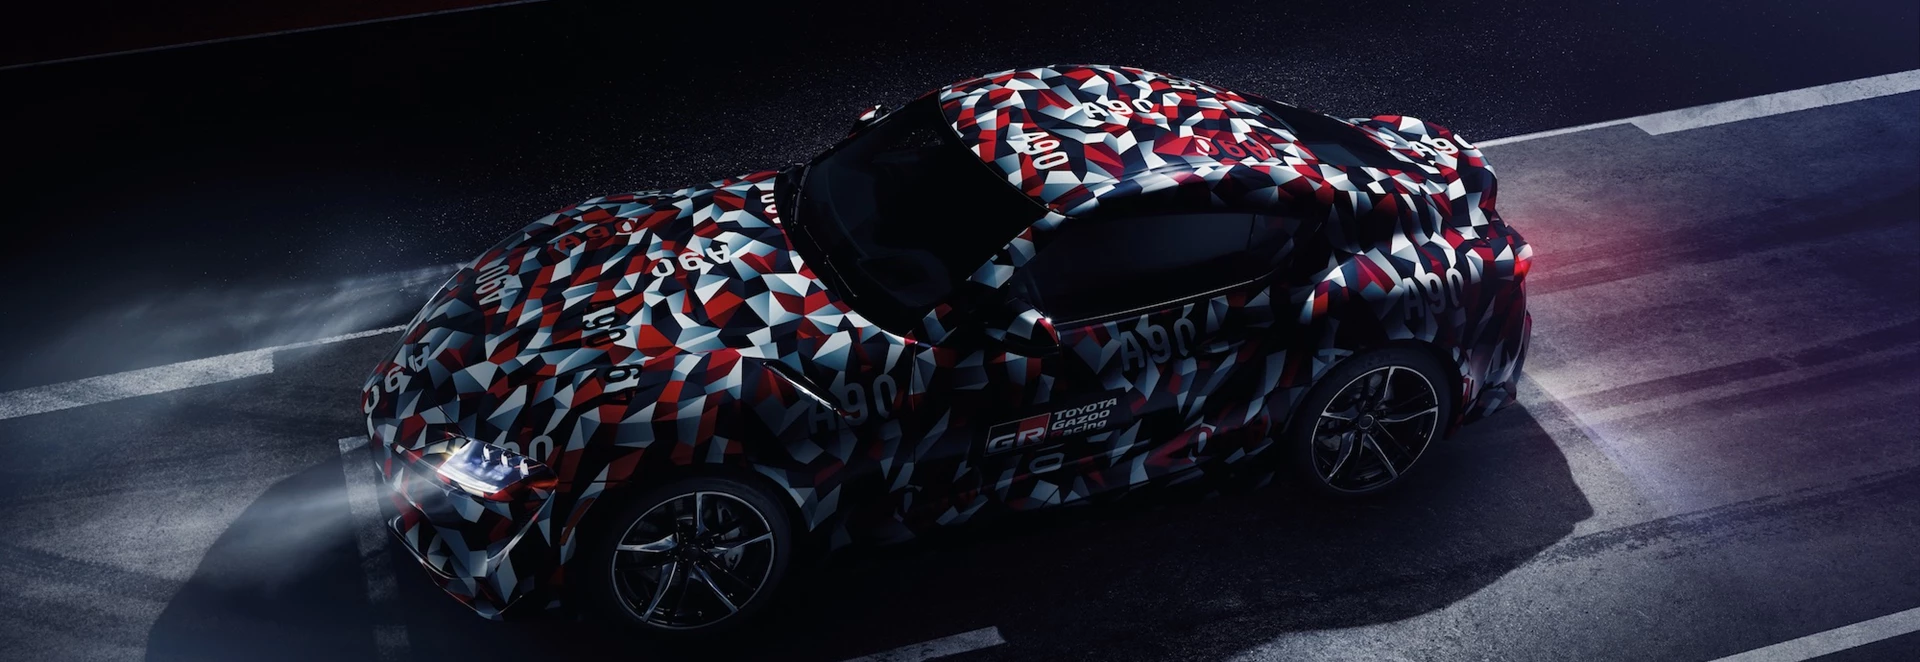 What to expect from the 2019 Toyota Supra